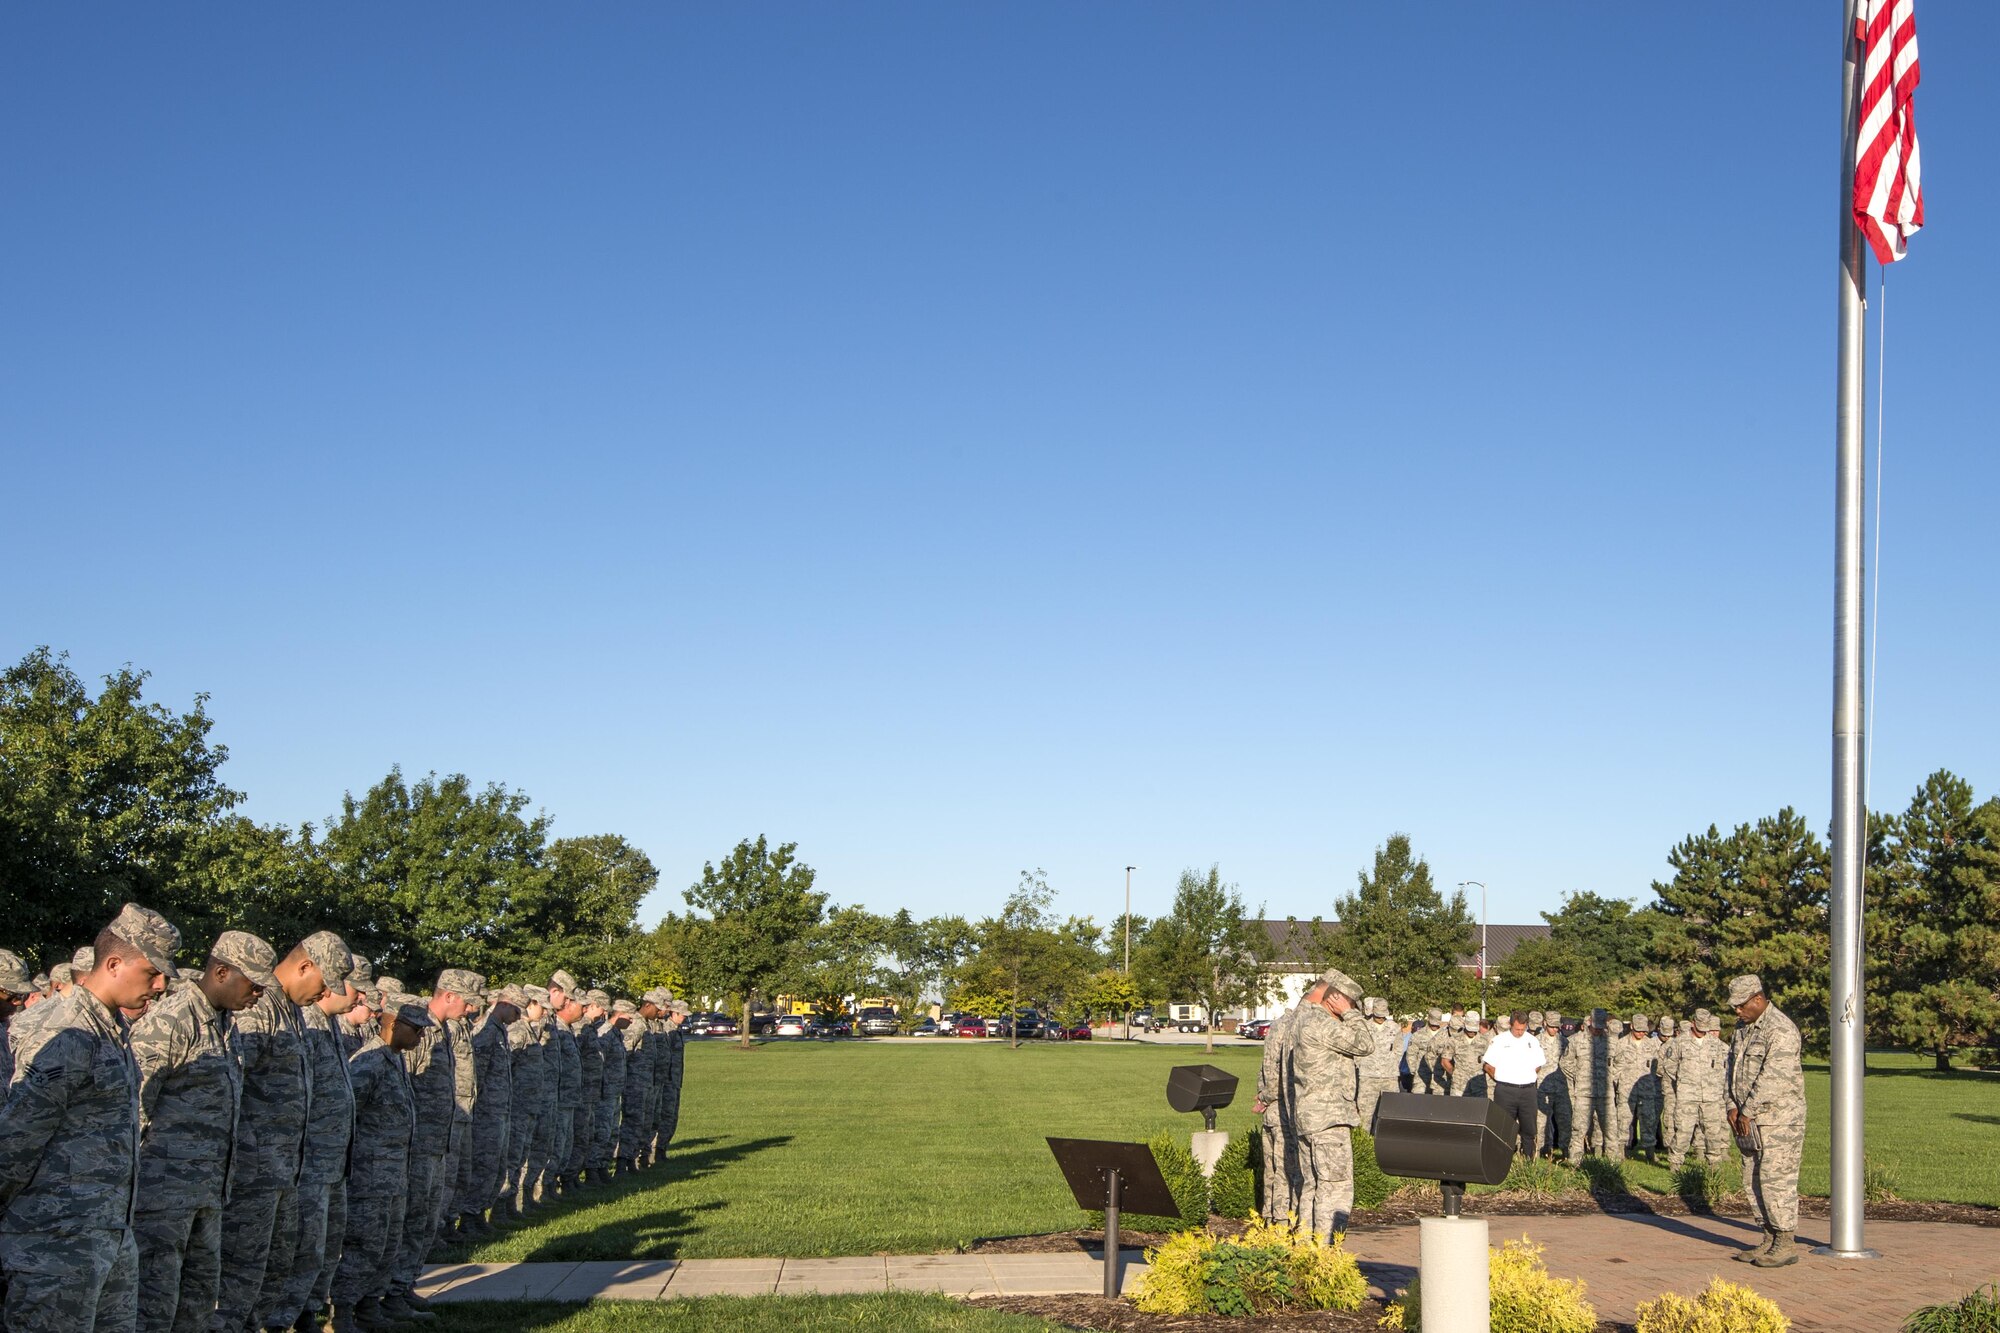 Grissom Airmen, firefighters and civilians joined Americans around the world and shared a moment of silence during a 9/11 memorial ceremony at Grissom Air Reserve Base, Sept. 11, 2016. The ceremony started at 8:46 a.m., the time the first aircraft crashed into the World Trade Center on Sept. 11, 2001. (U.S. Air Force photo/Tech. Sgt. Benjamin Mota)